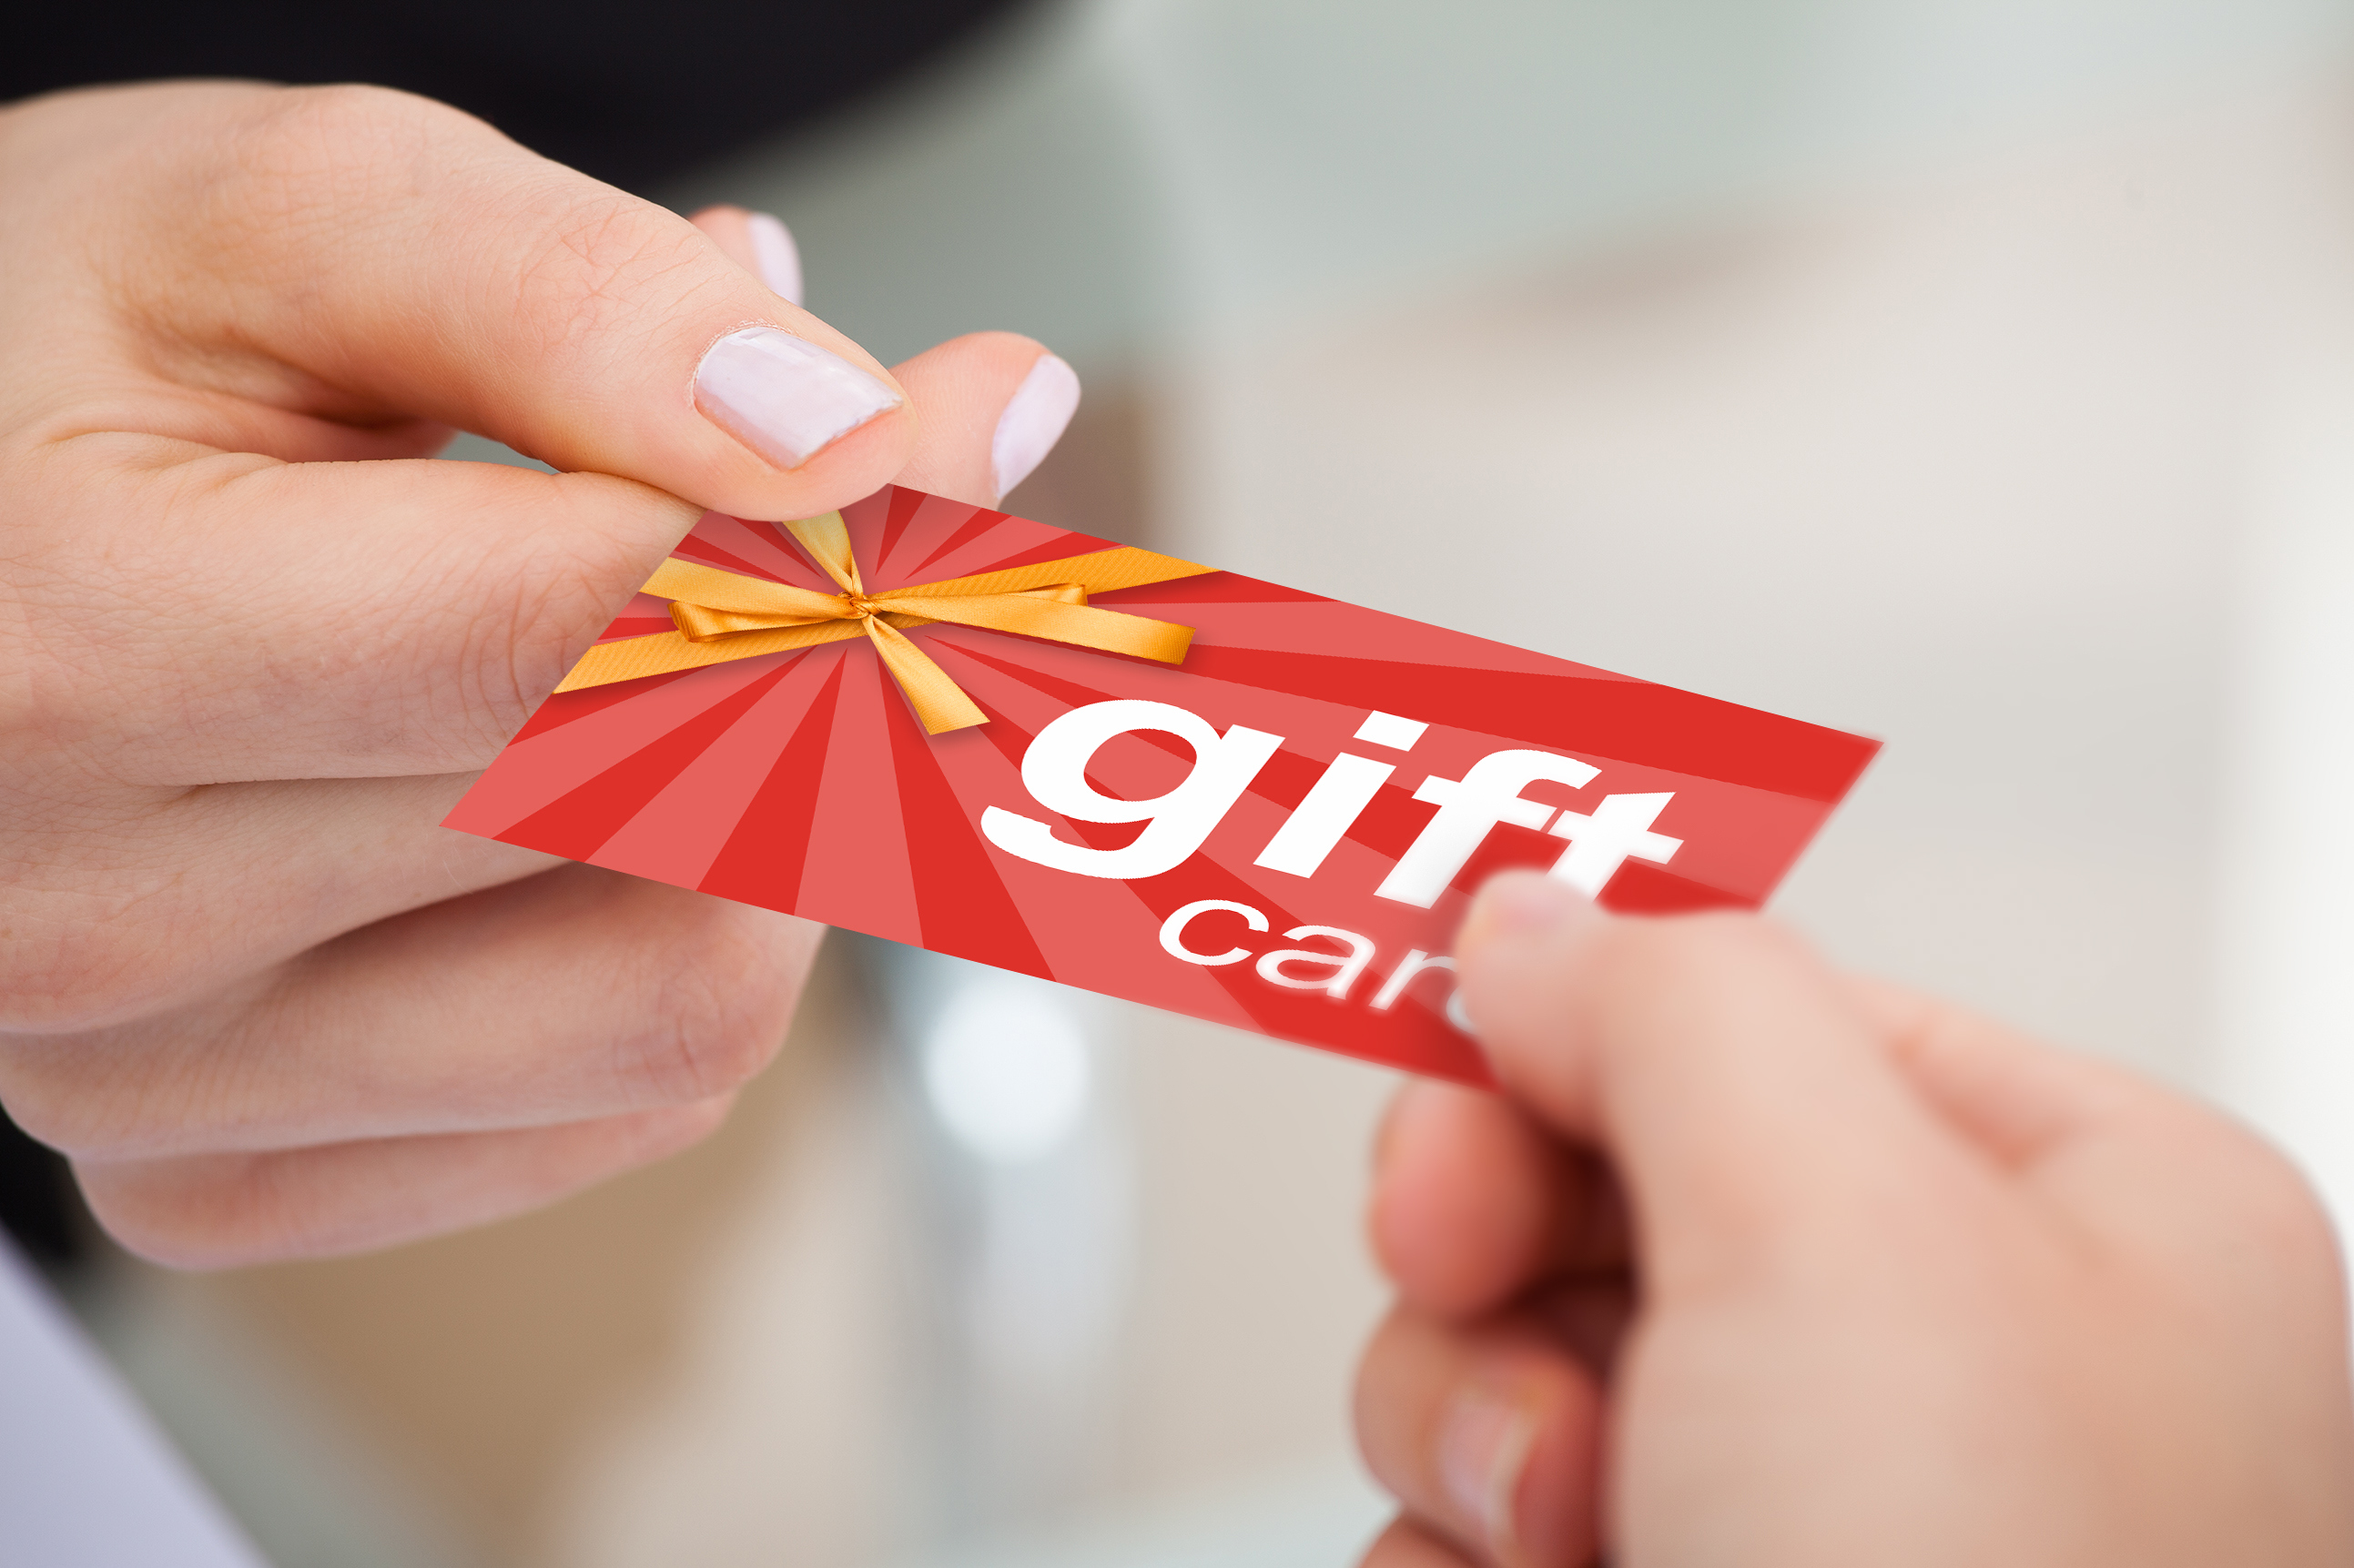 How to Buy Gift Cards for Less